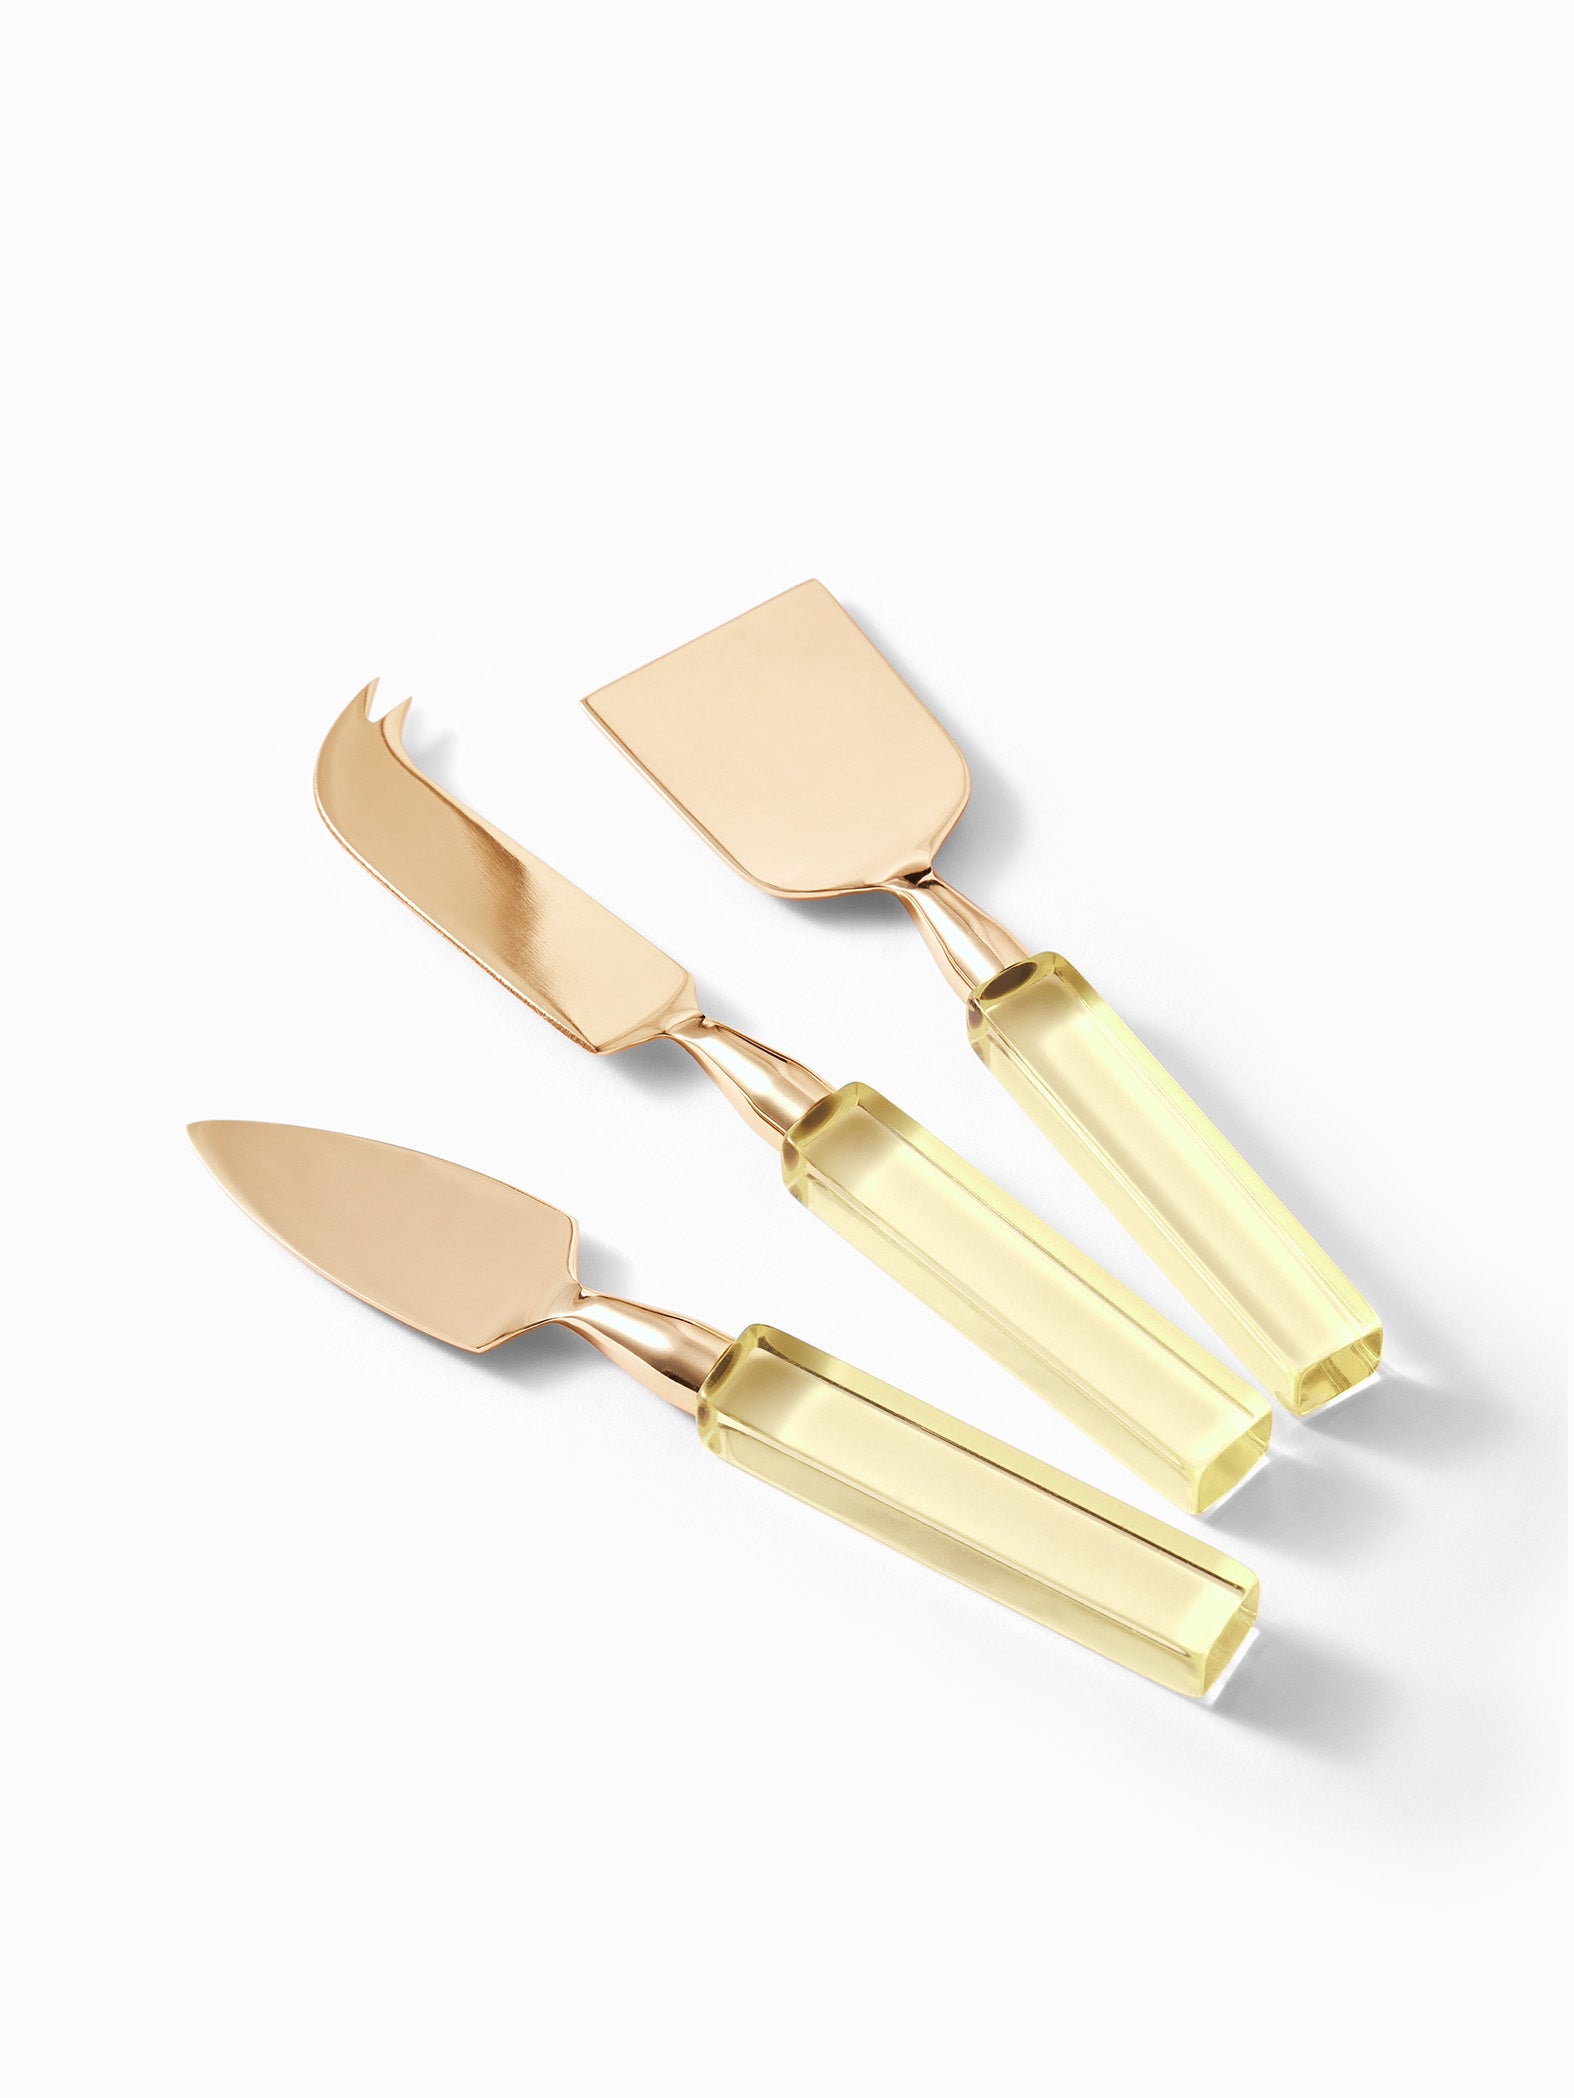 Gold & Acrylic Cheese Knives